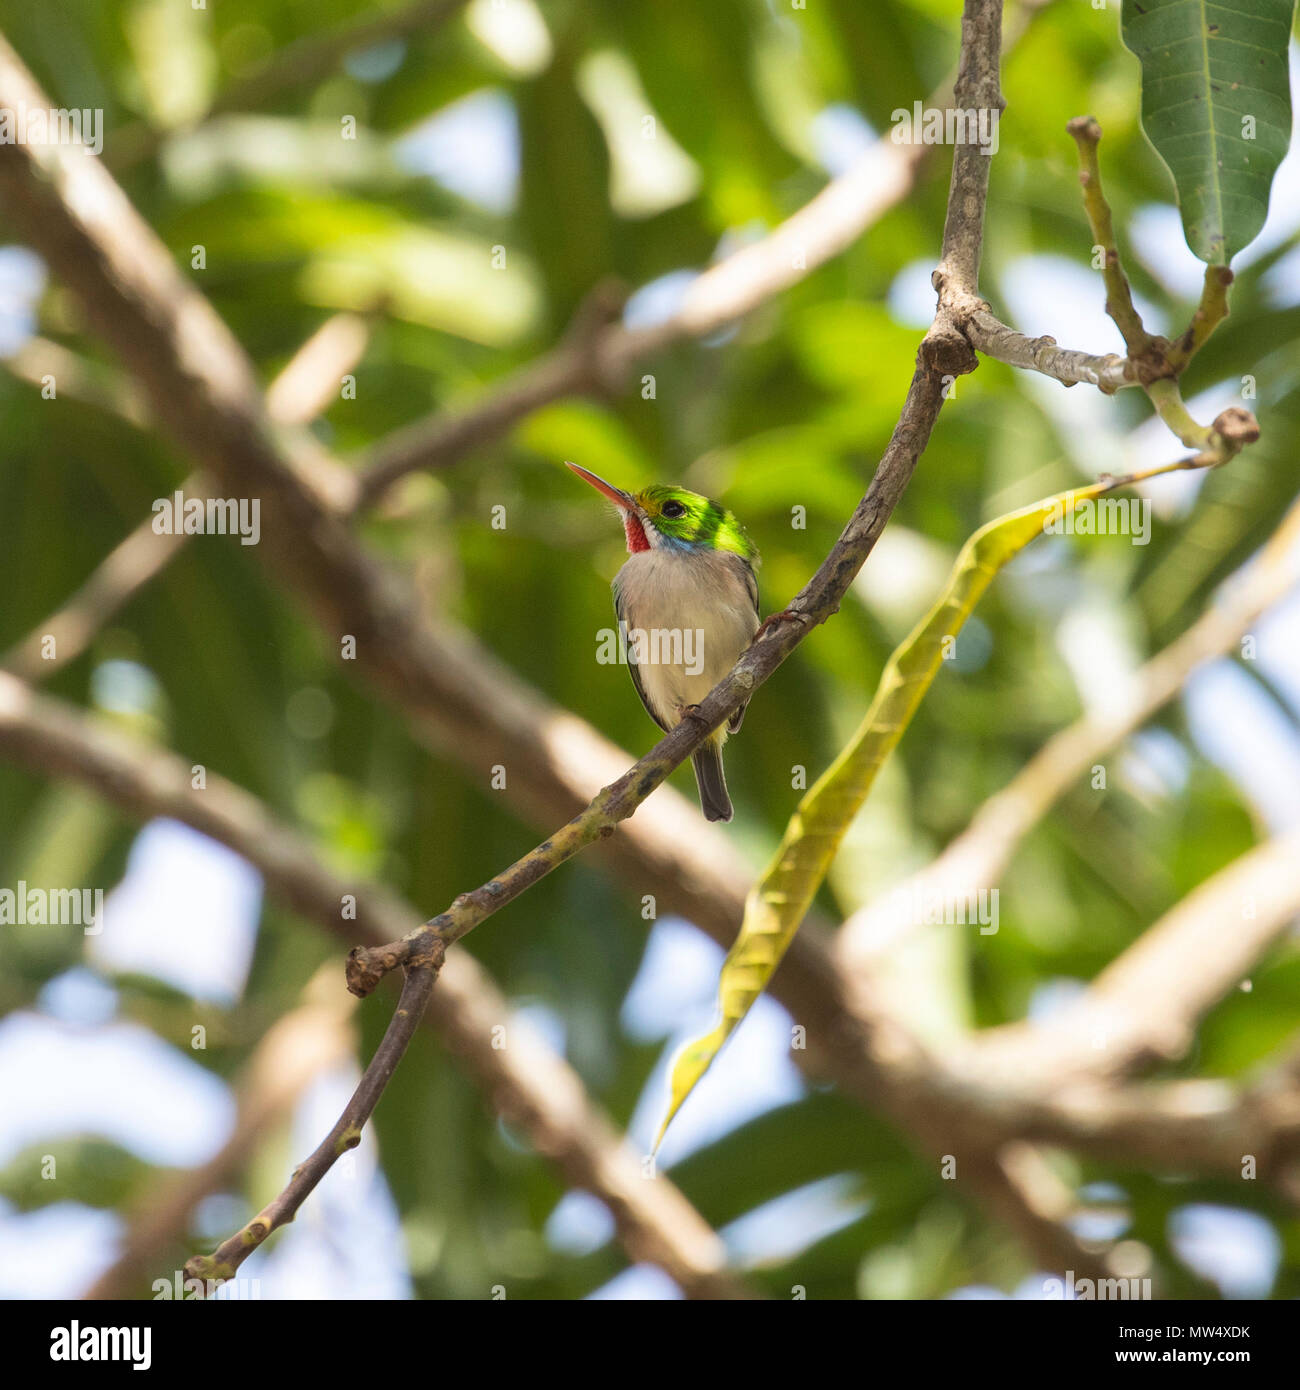 Cuban Tody, a tiny bird, perched on a branch Stock Photo